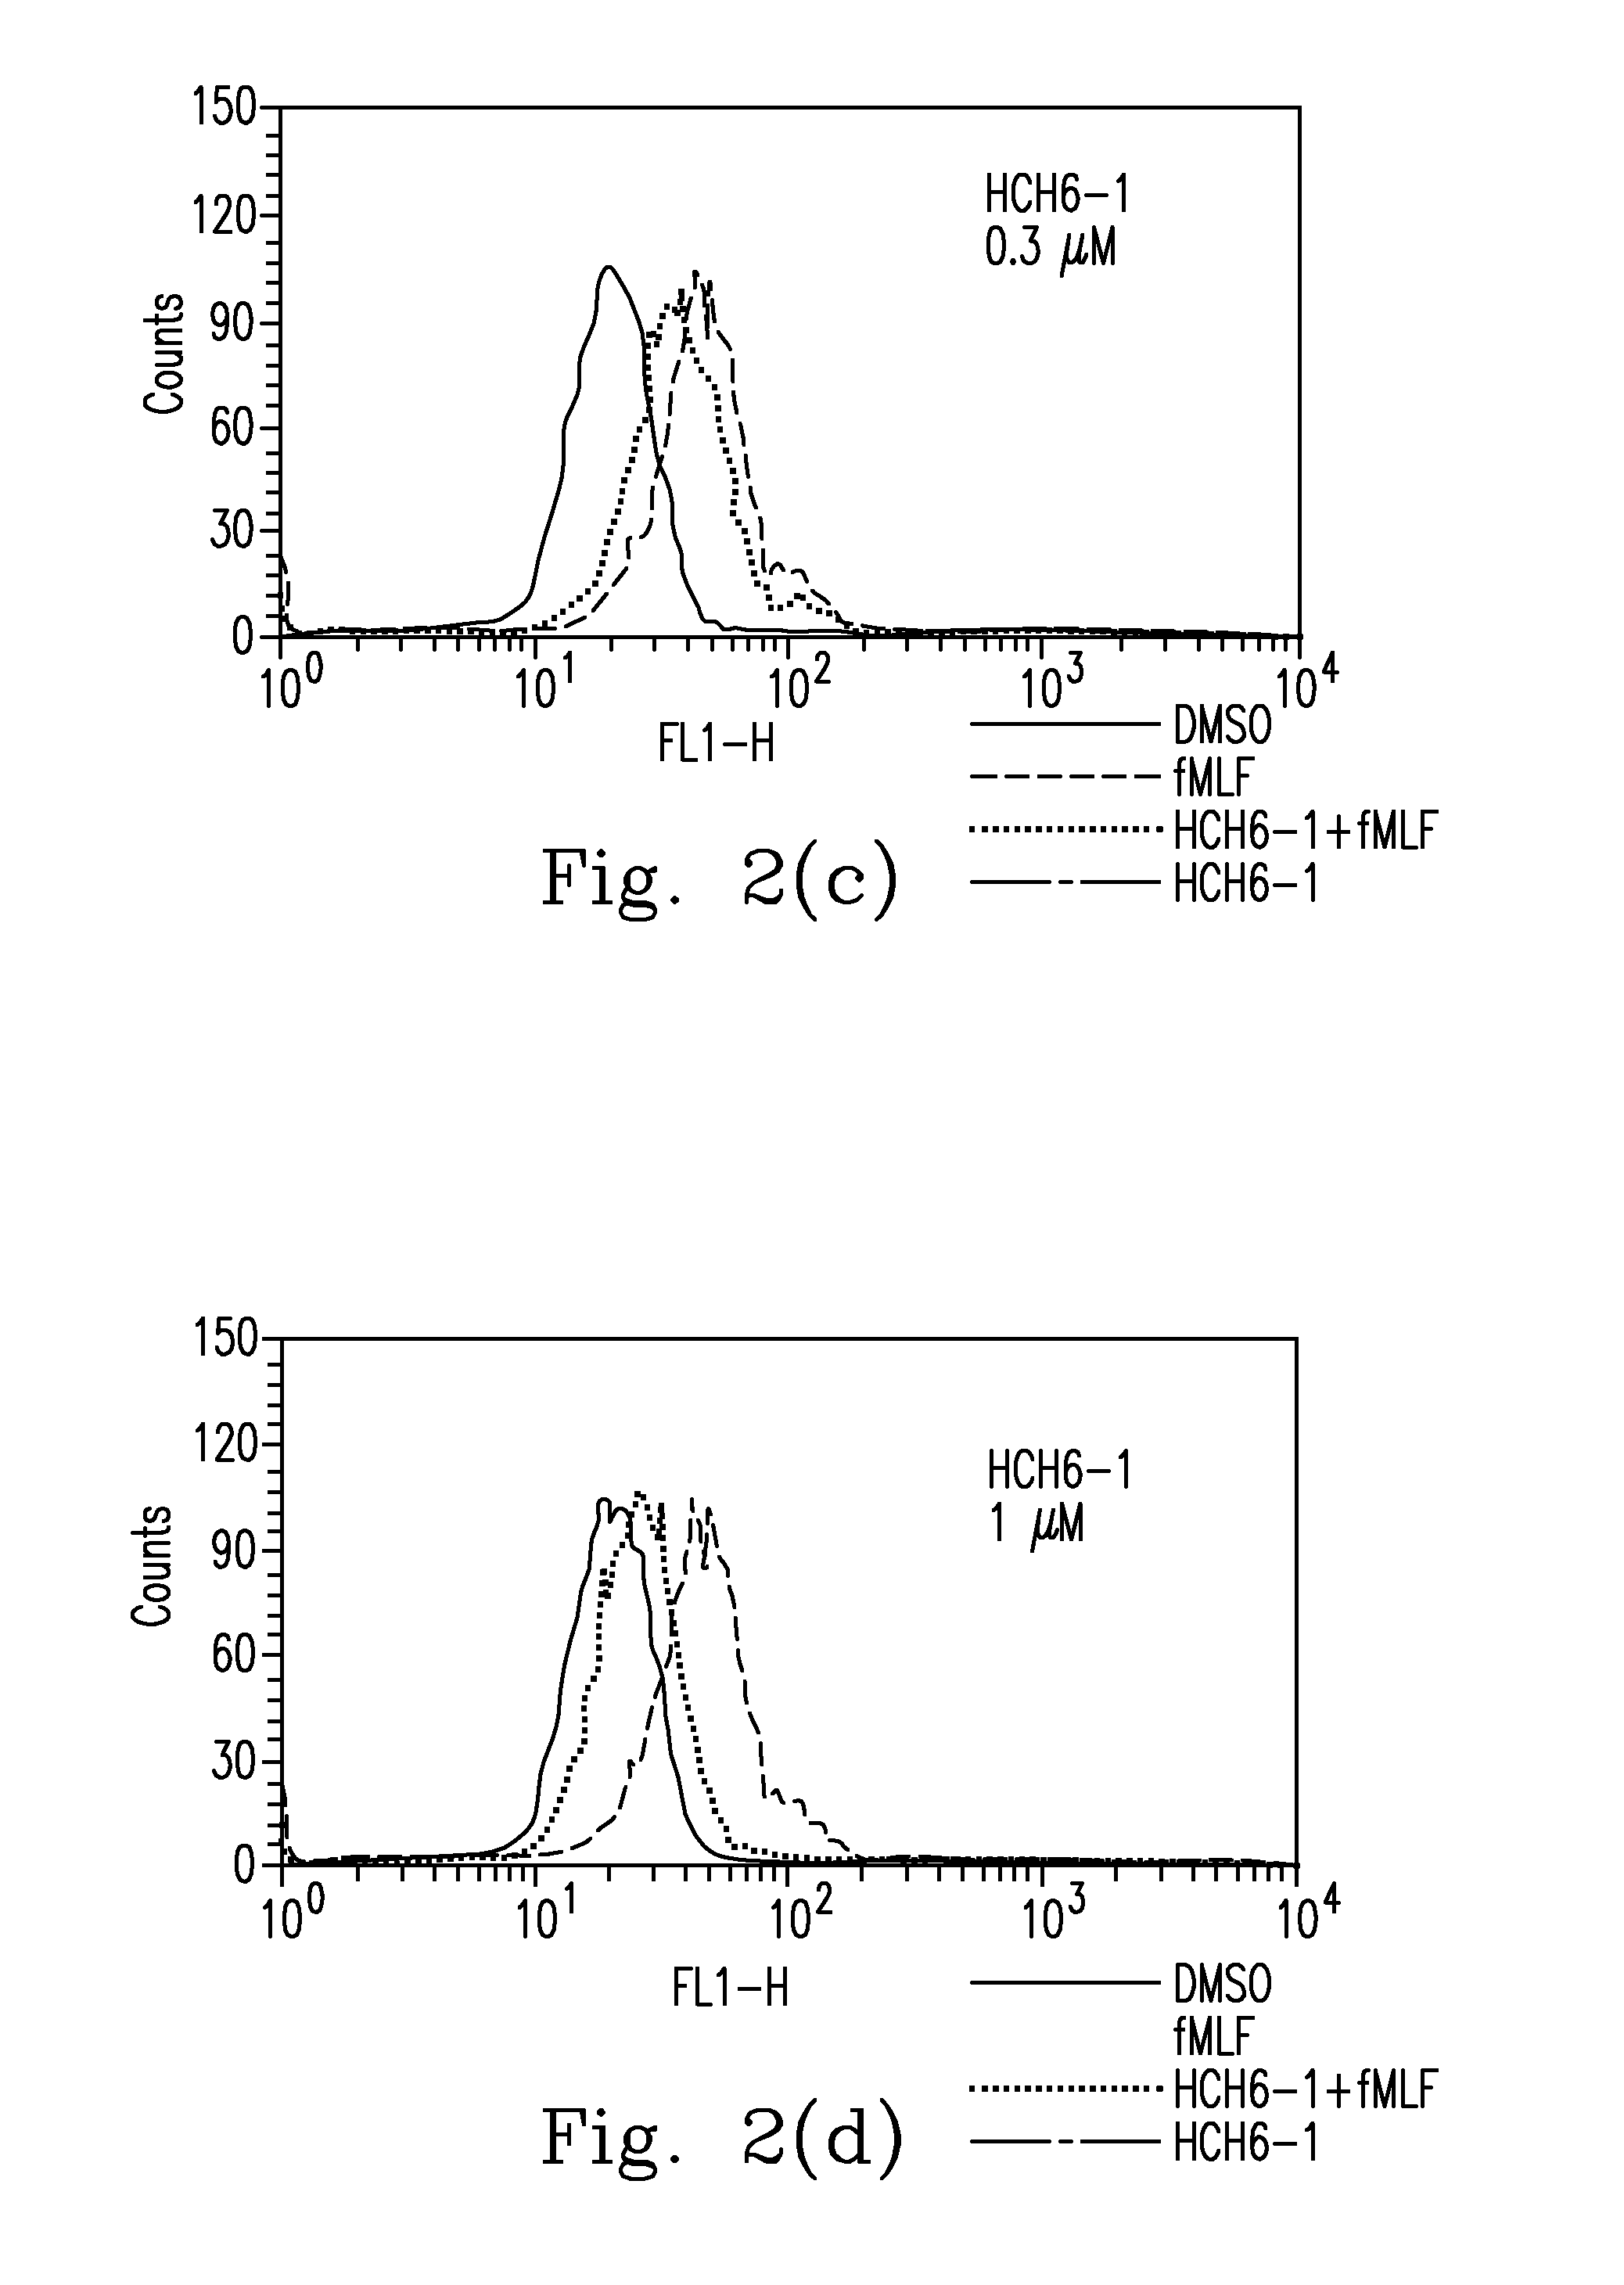 FPR1 antagonist derivatives and use thereof